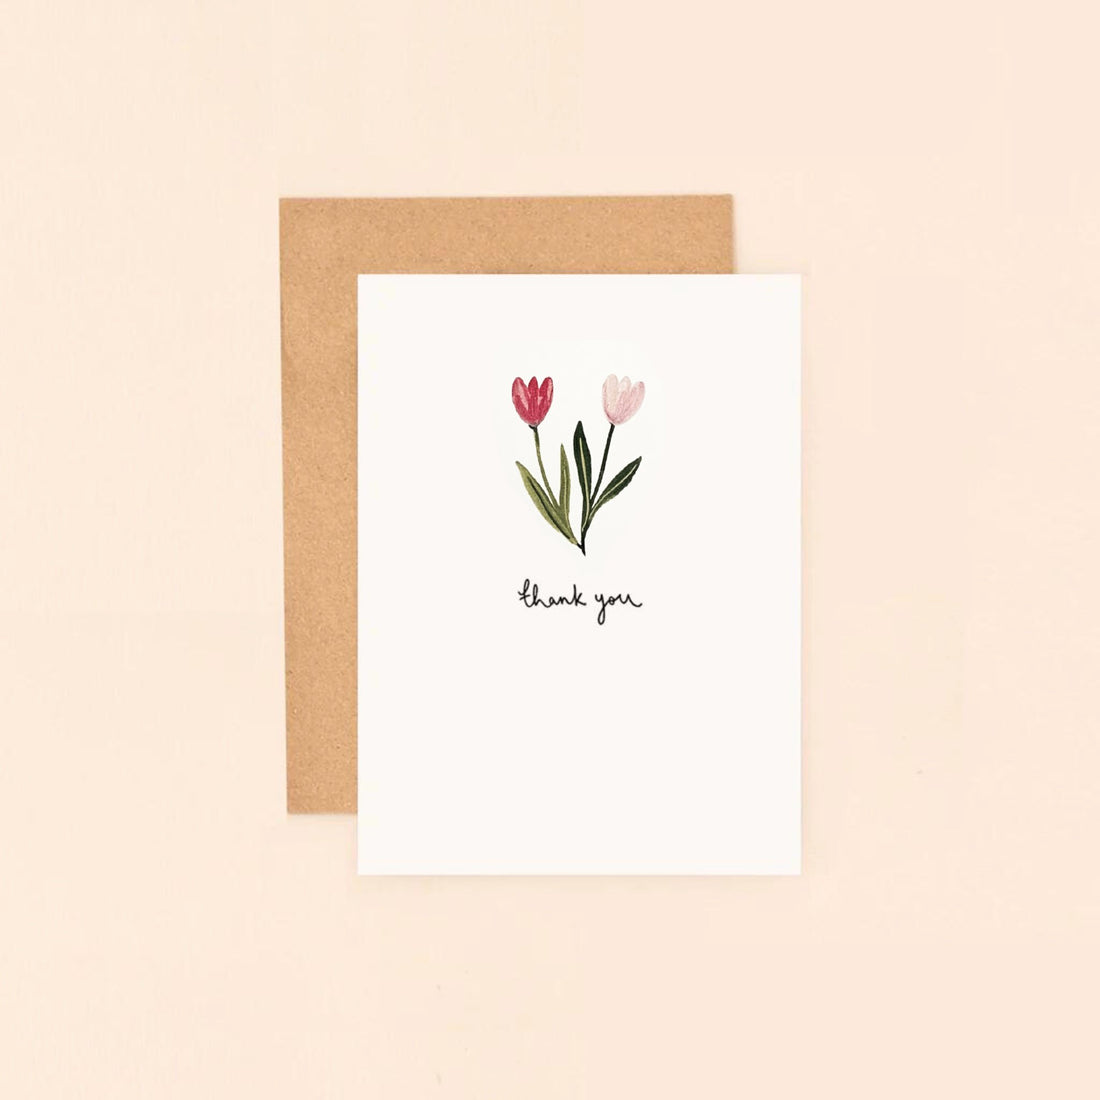 Thank You Cards by Louise Mulgrew - The Flower Crate